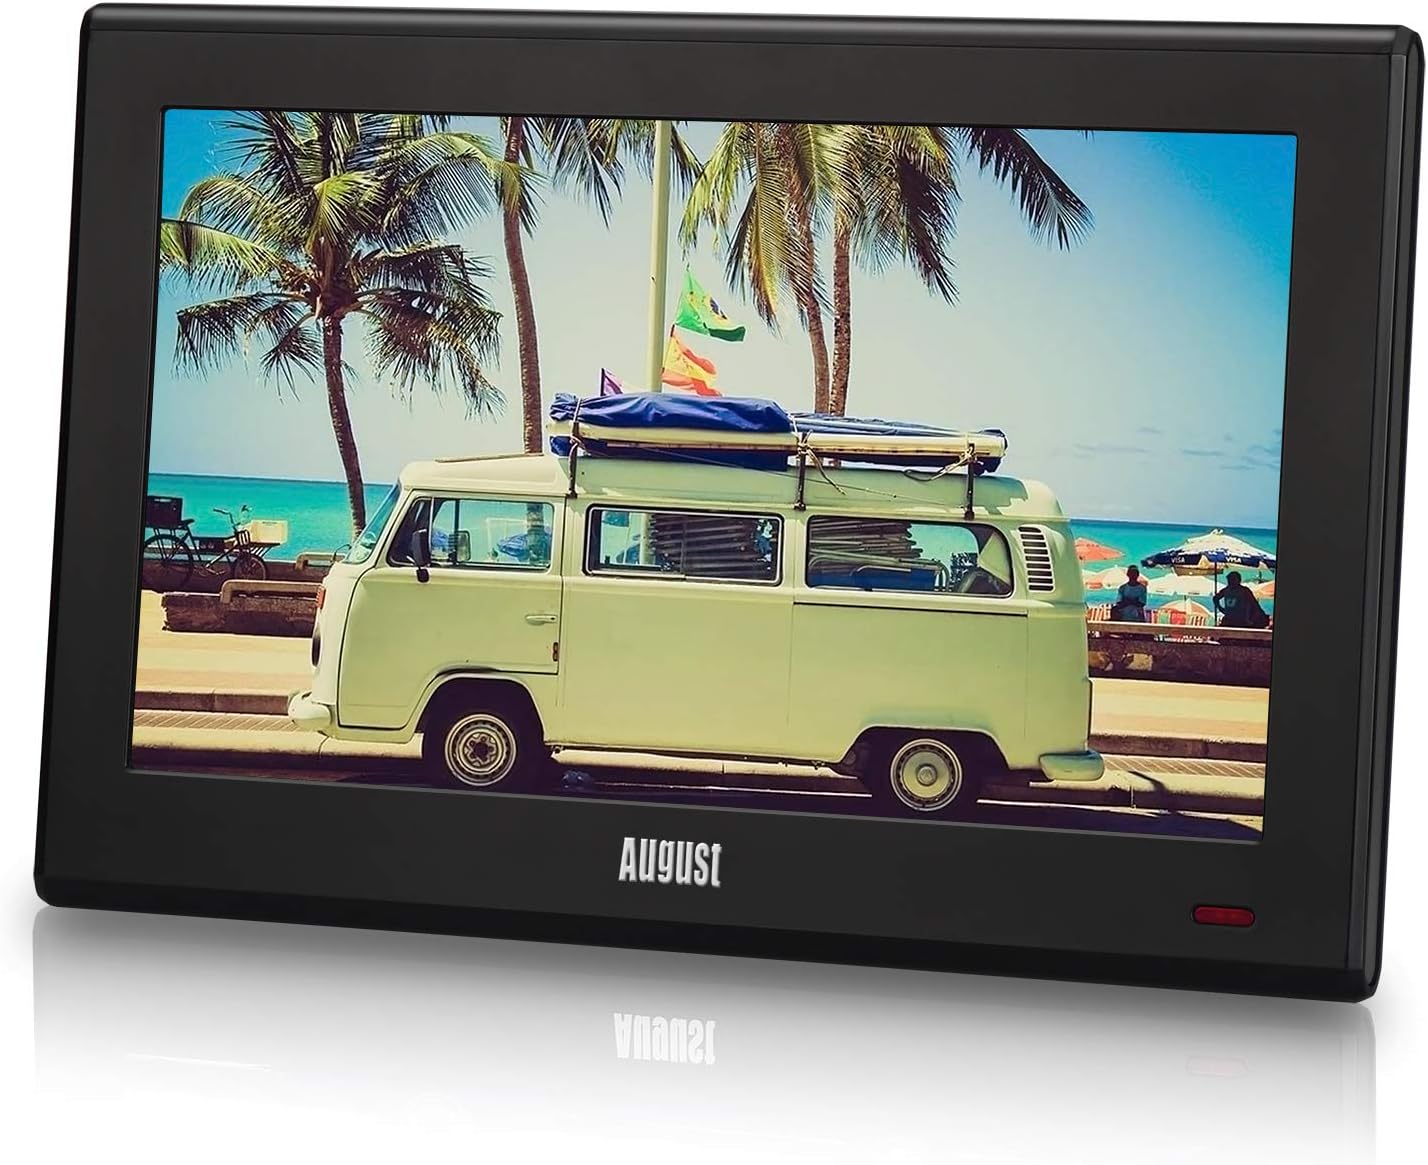 Portable TV 10" Freeview - August DA100D - Digital Television with In - built Recorder HDMI, USB & Multimedia Player / DVB - T2 MPEG4 H.264 / H.265 - Home & Campervan - Amazing Gadgets Outlet